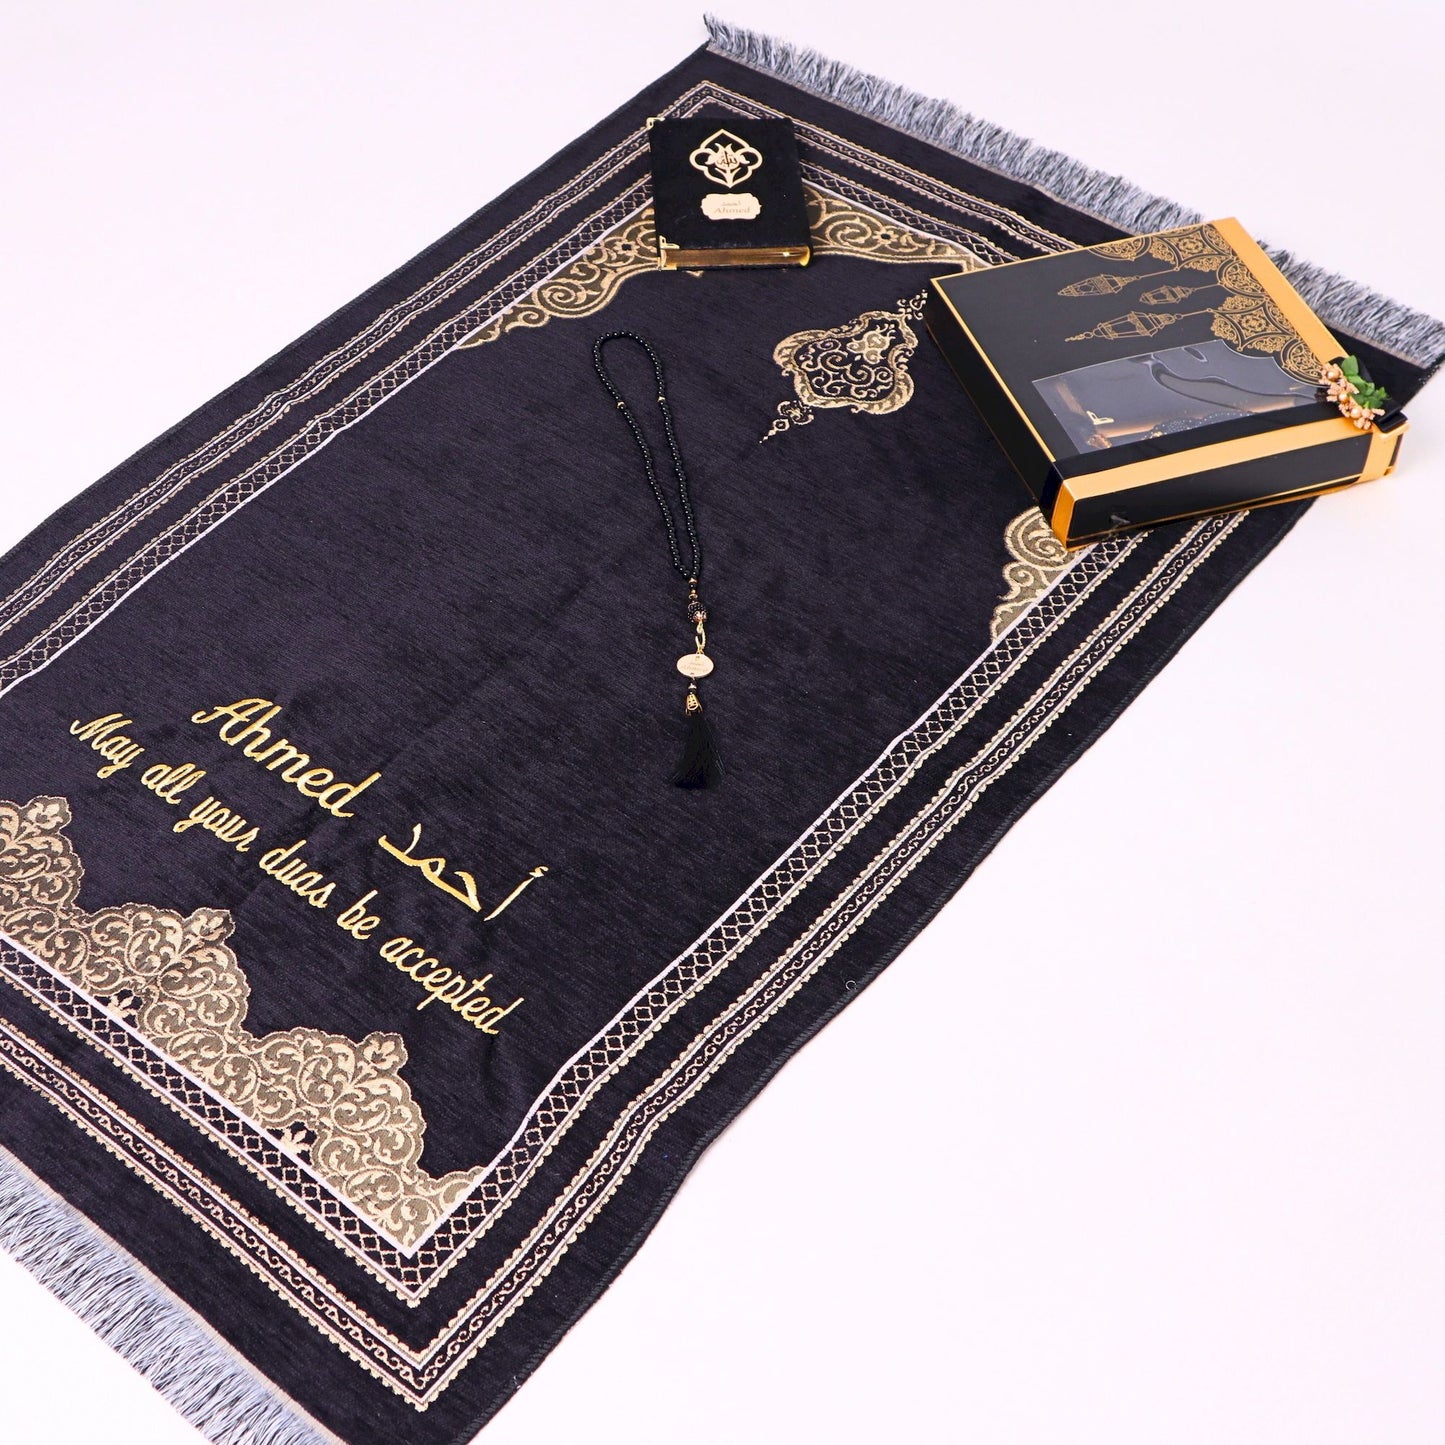 Personalized Chenille Prayer Mat Quran Tasbeeh Islamic Lux Gift Set - Islamic Elite Favors is a handmade gift shop offering a wide variety of unique and personalized gifts for all occasions. Whether you're looking for the perfect Ramadan, Eid, Hajj, wedding gift or something special for a birthday, baby shower or anniversary, we have something for everyone. High quality, made with love.